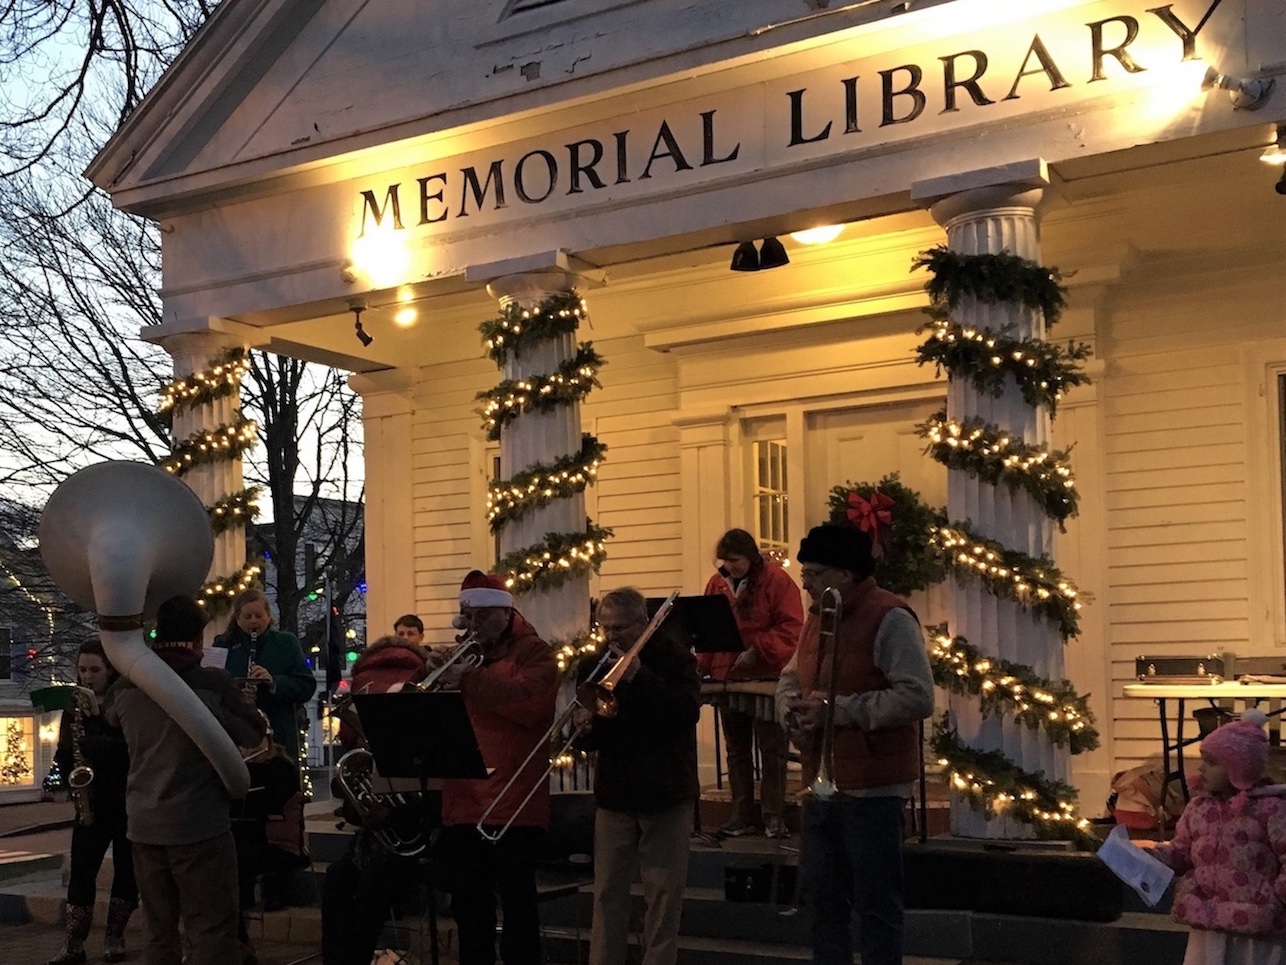 Community band playing at Christmas event in front of library.